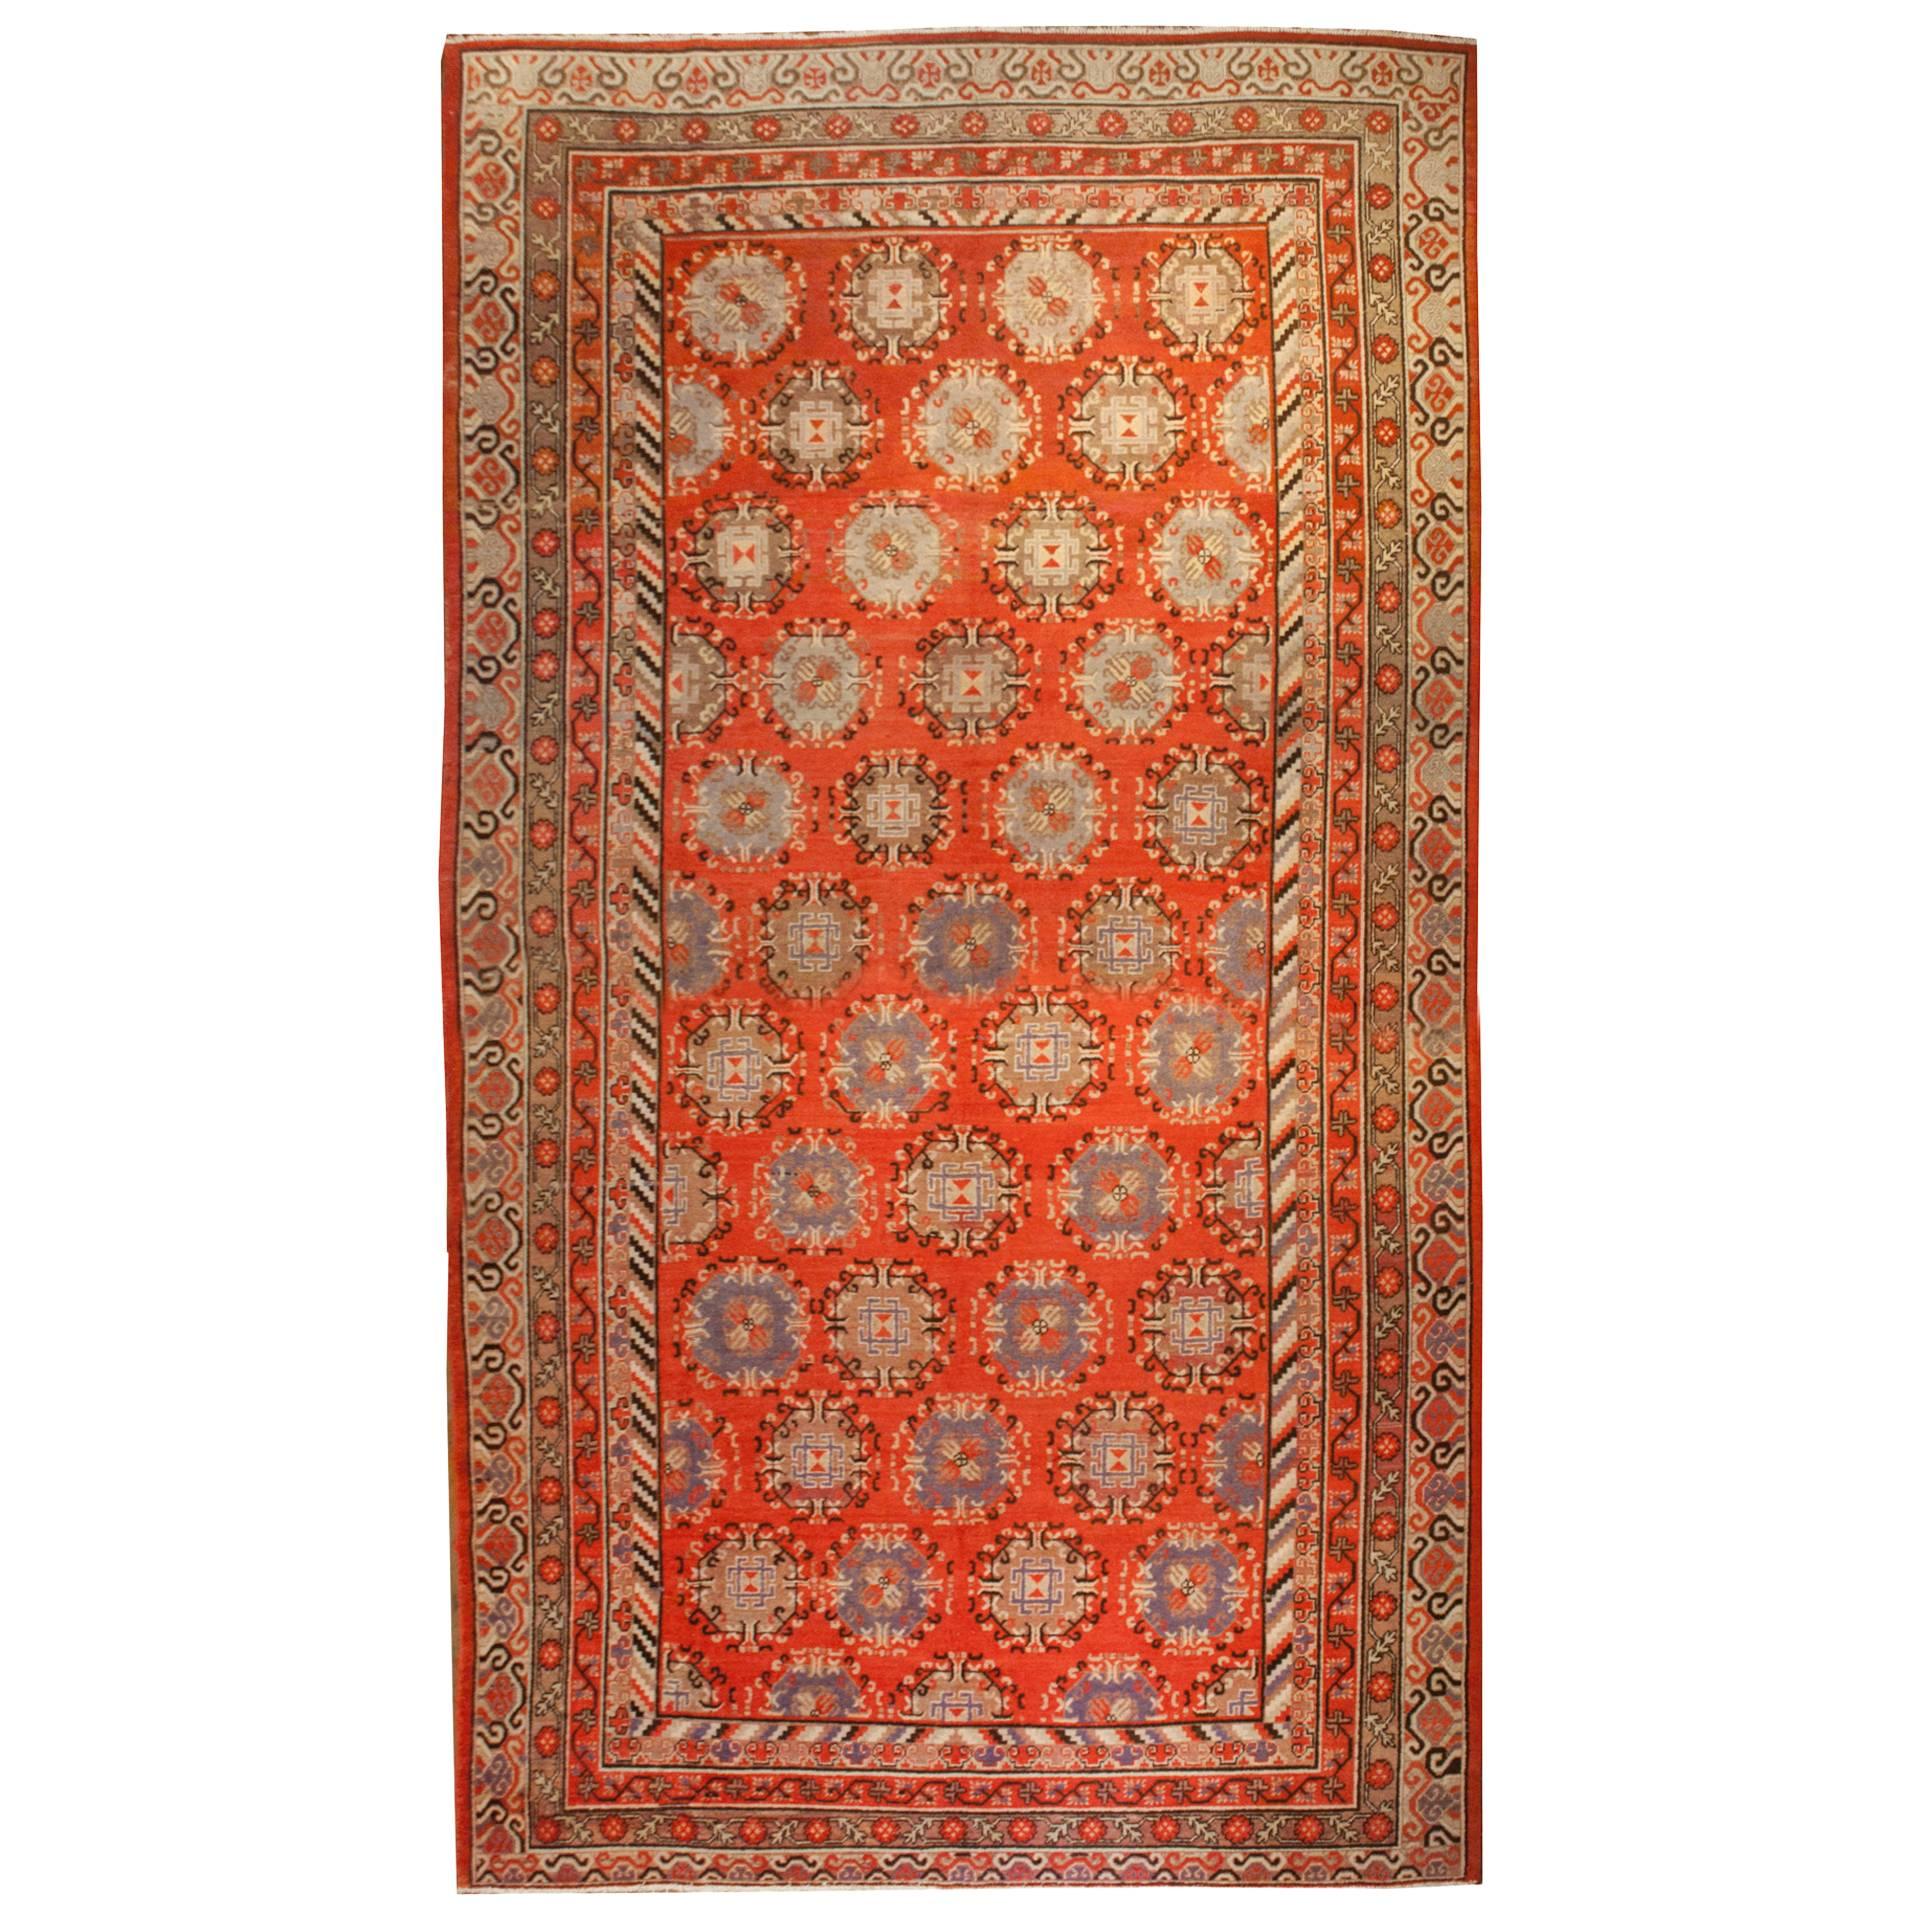 Early 20th Century Khotan Rug For Sale